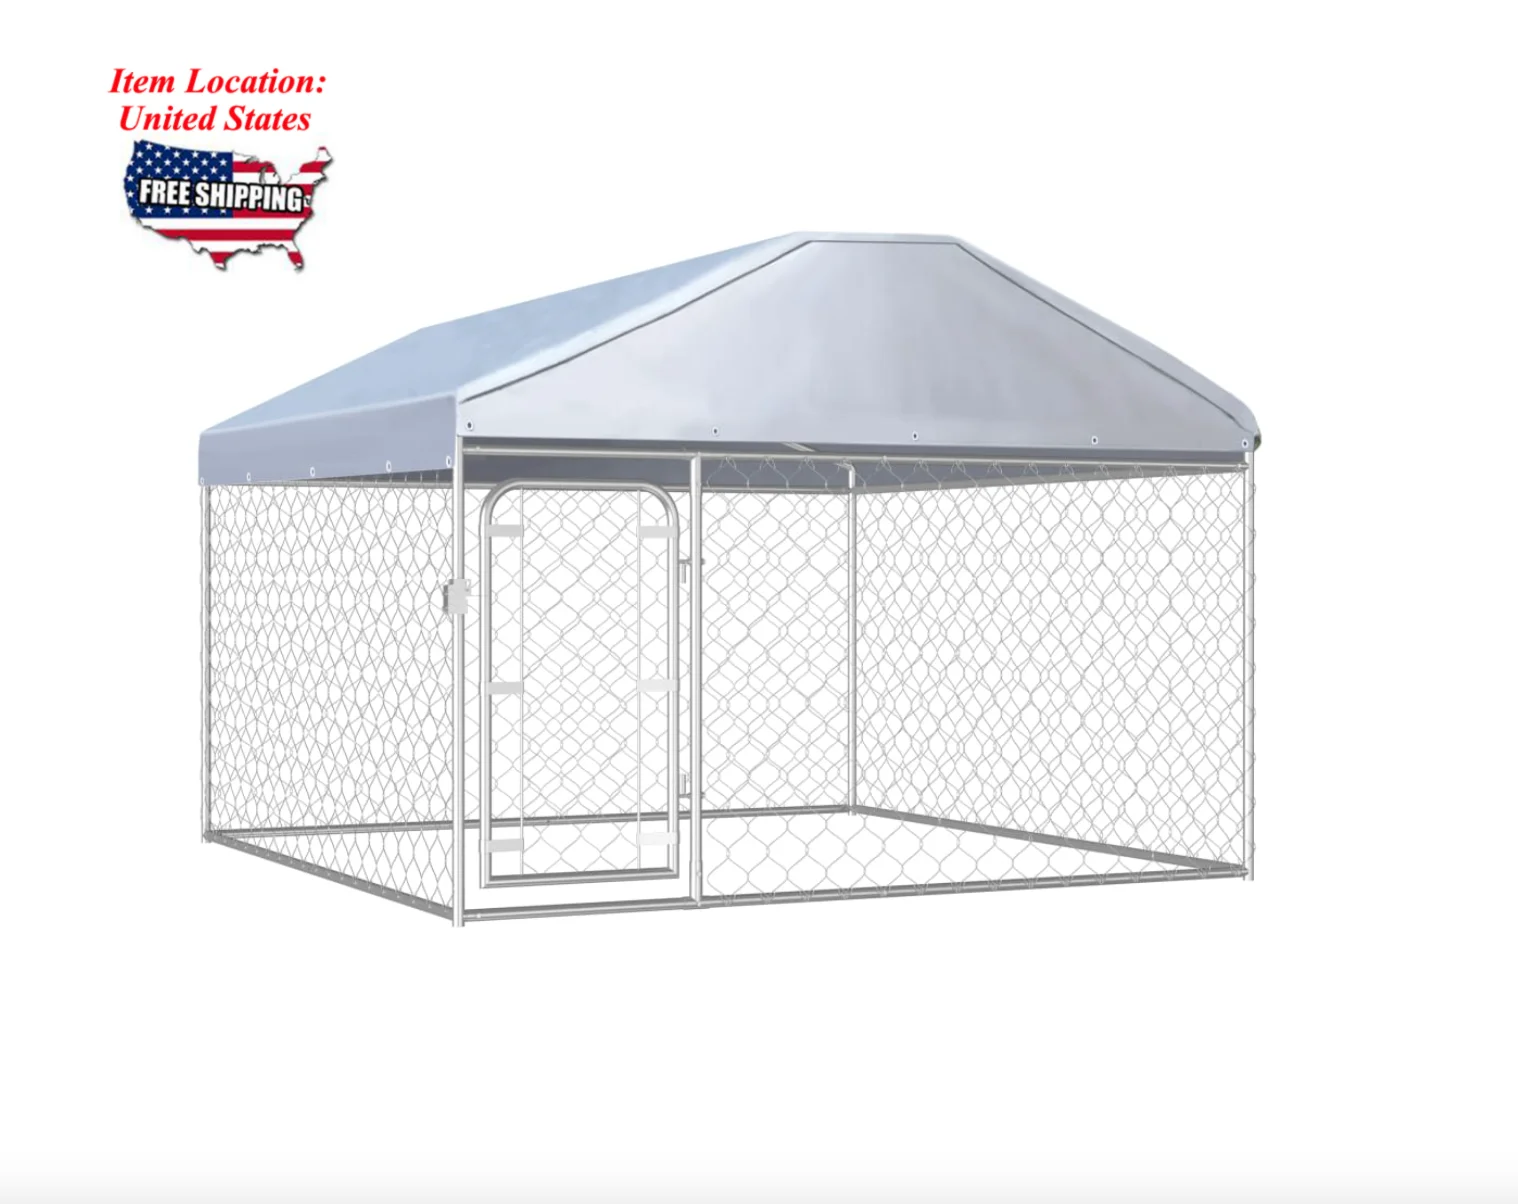 

Outdoor Dog Kennel with Roof 78.7"x78.7"x53.1", Garden Pet Cage Dog Training, SHIPPING FROM UNITED STATES